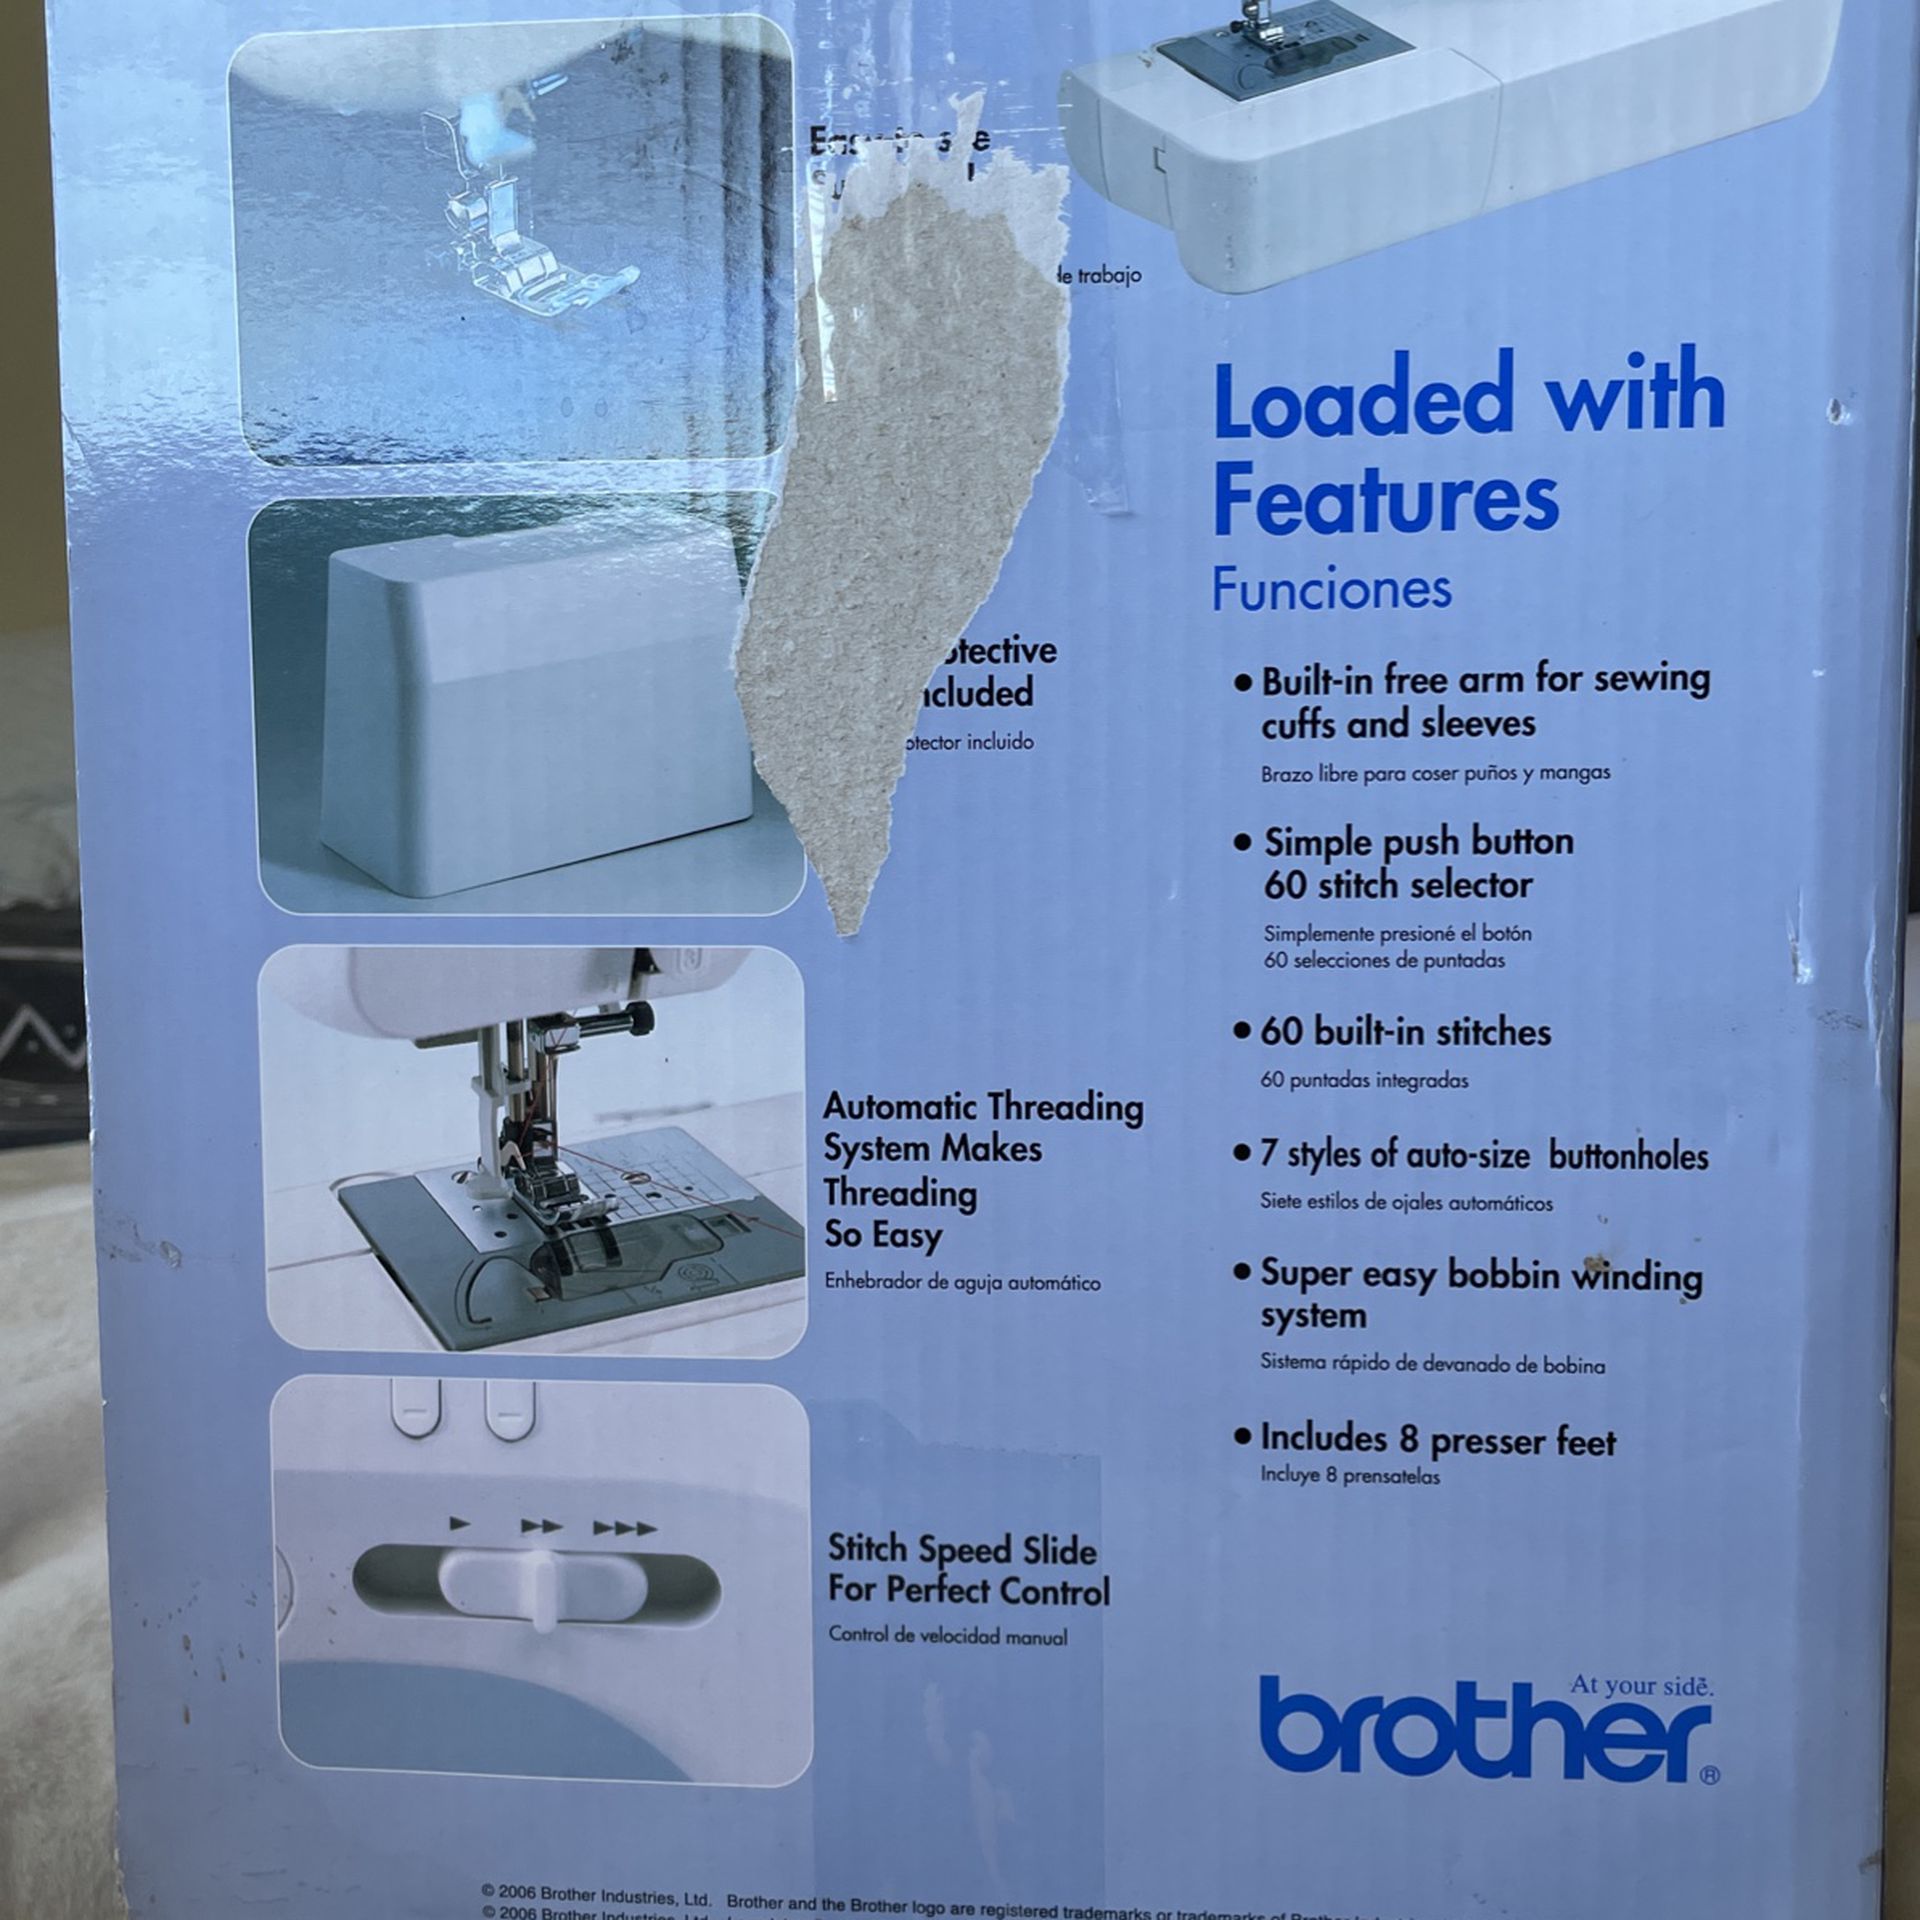 Brother Sewing Machine CS6000i for Sale in Los Angeles, CA - OfferUp